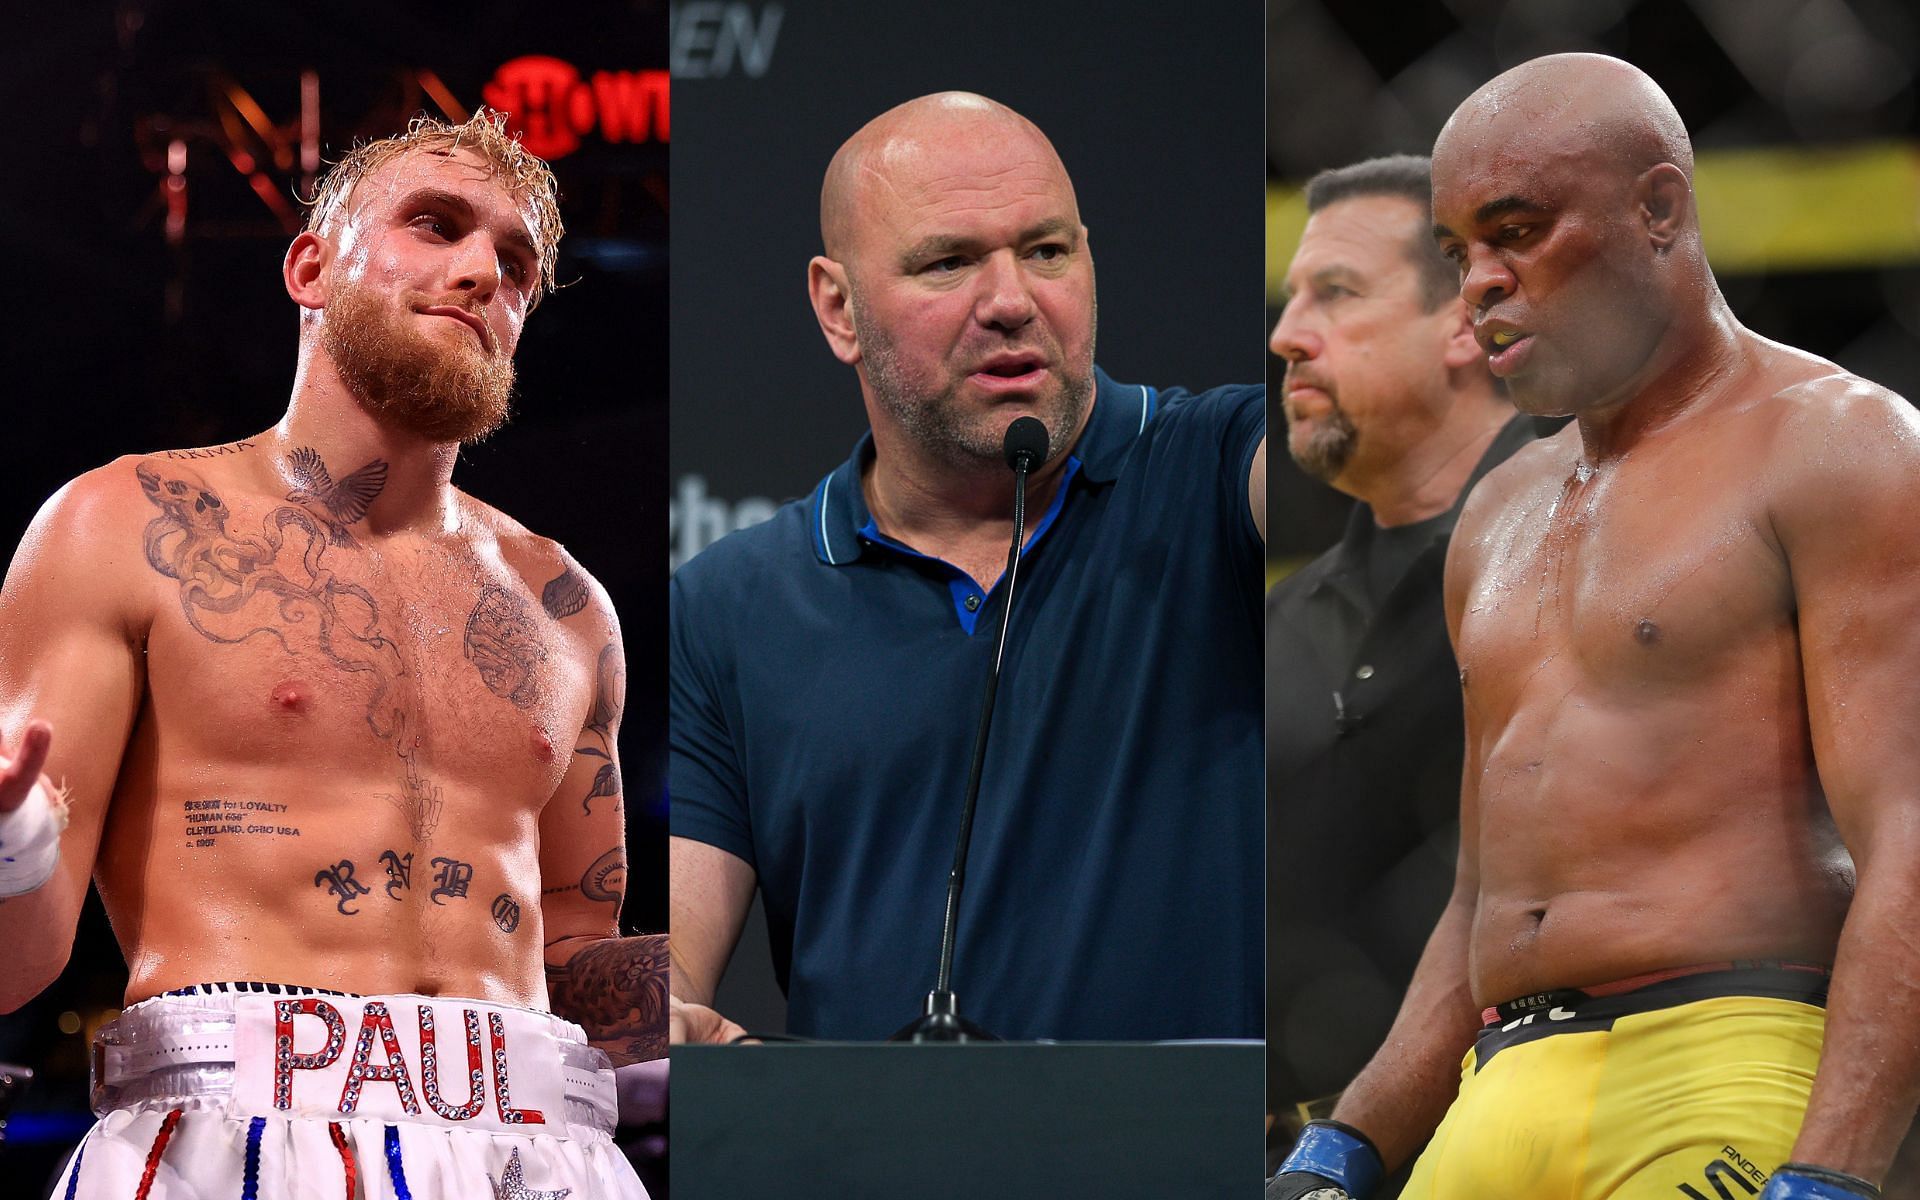 Jake Paul (left), Dana White, and Anderson Silva (right) (Image credits Getty Images)